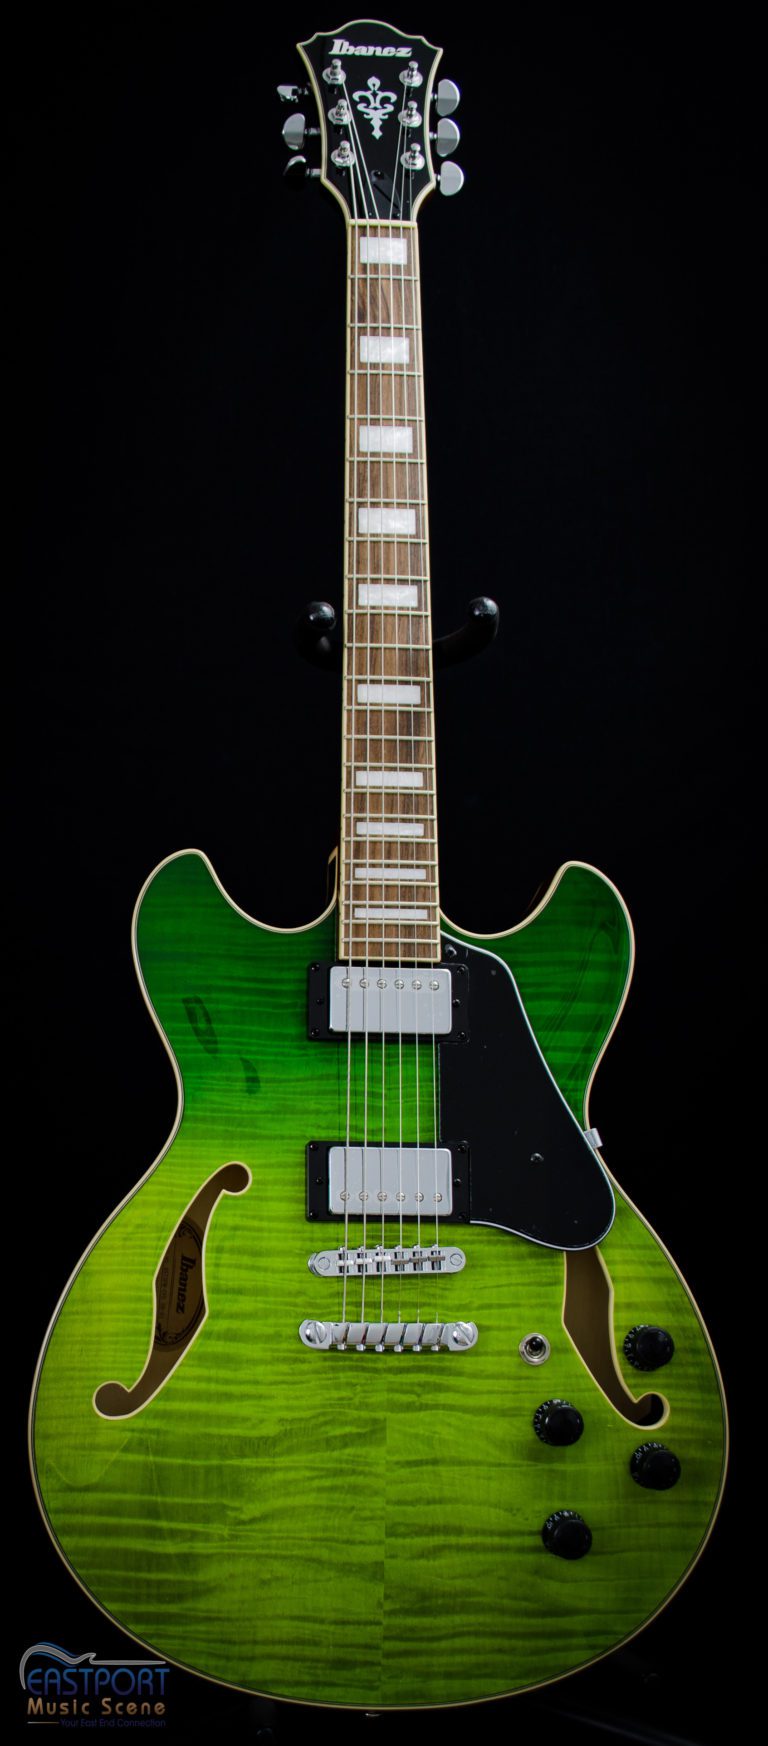 A green electric guitar with black trim and a white neck.